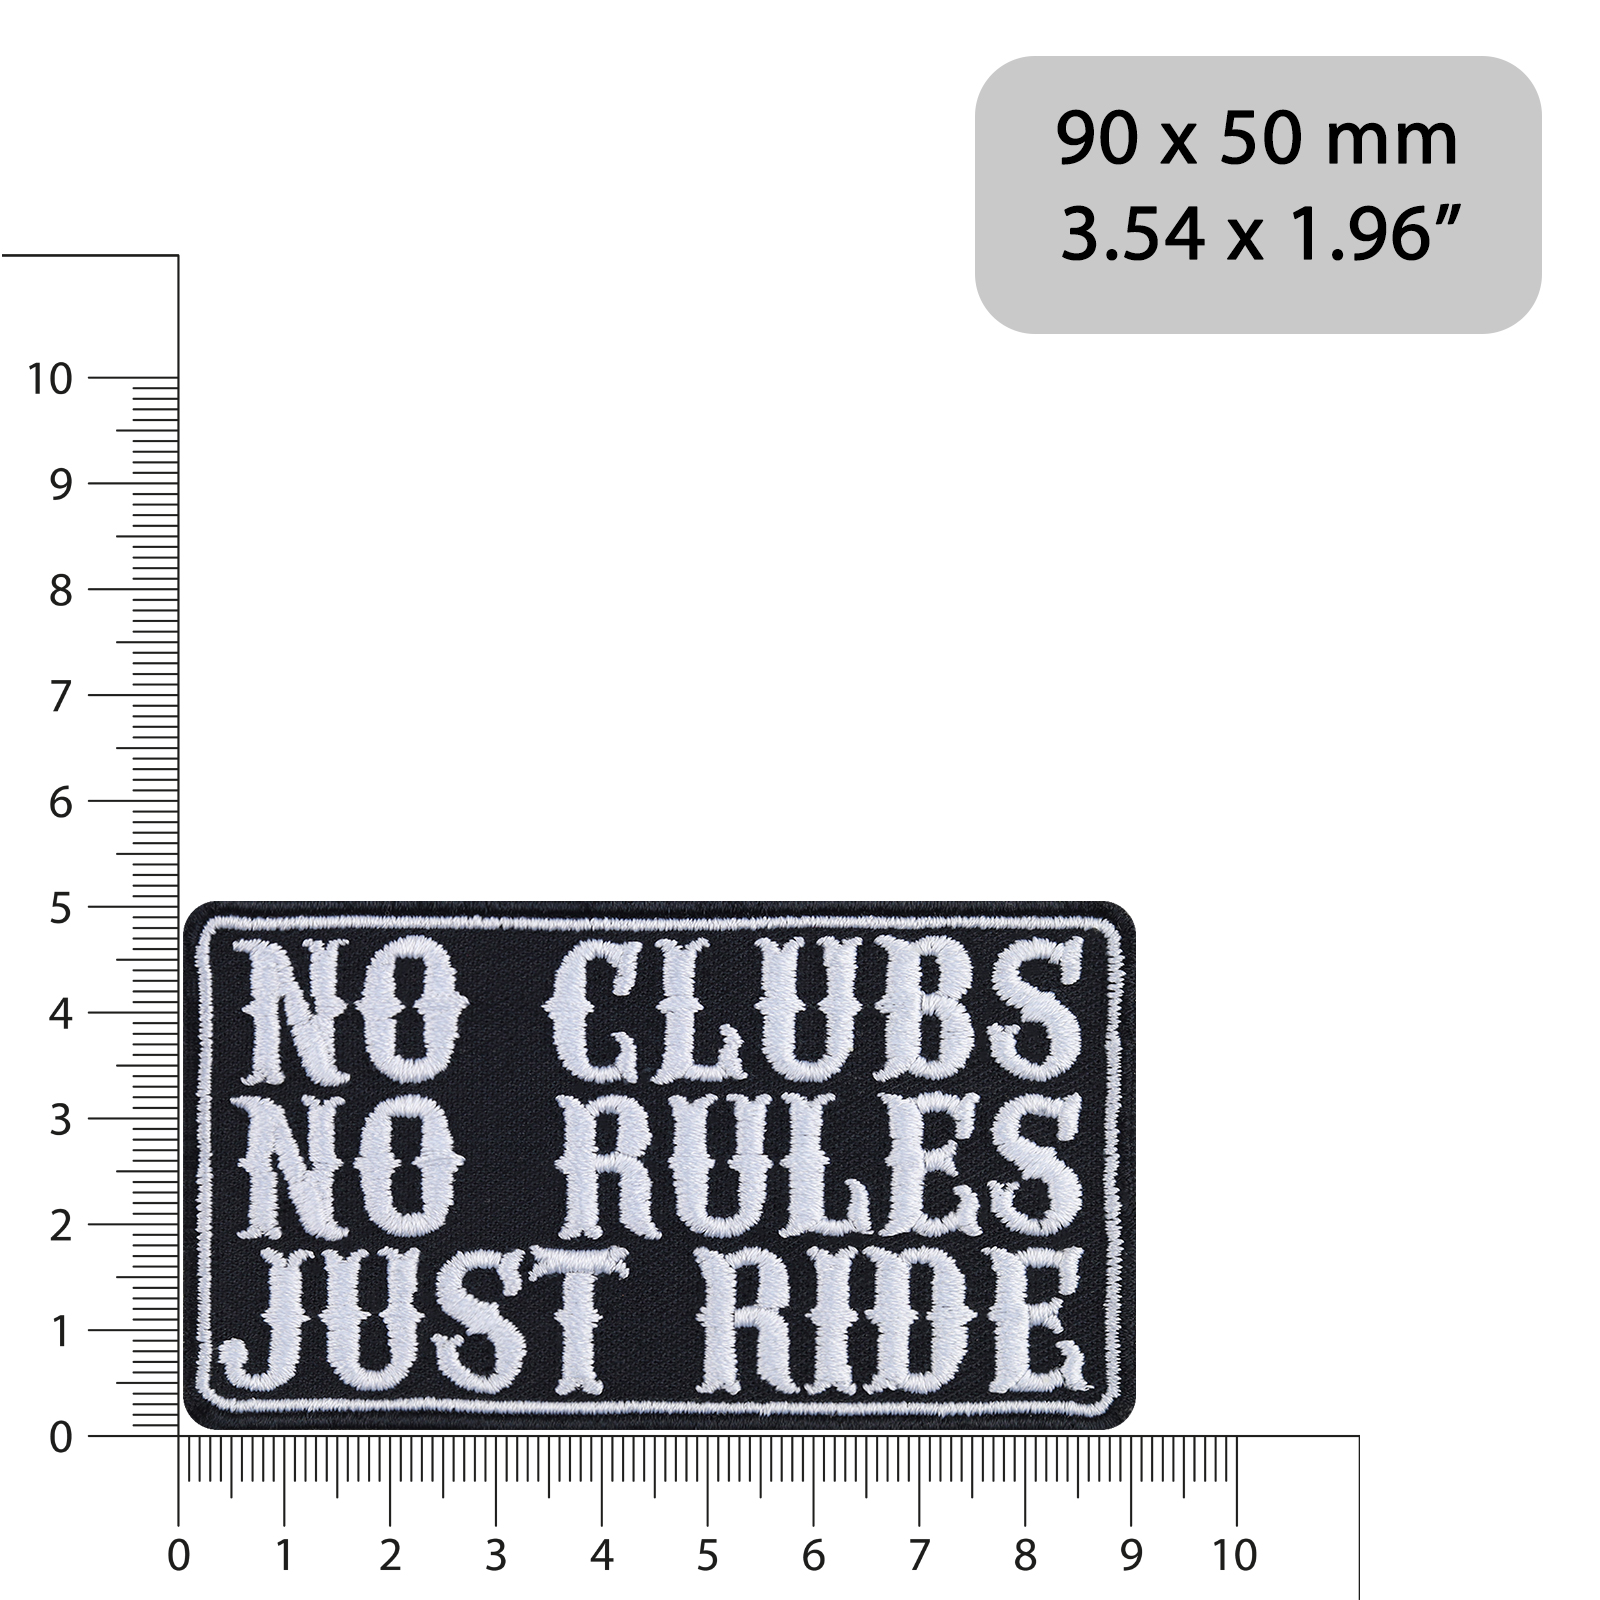 No clubs, no rules, just ride - Patch